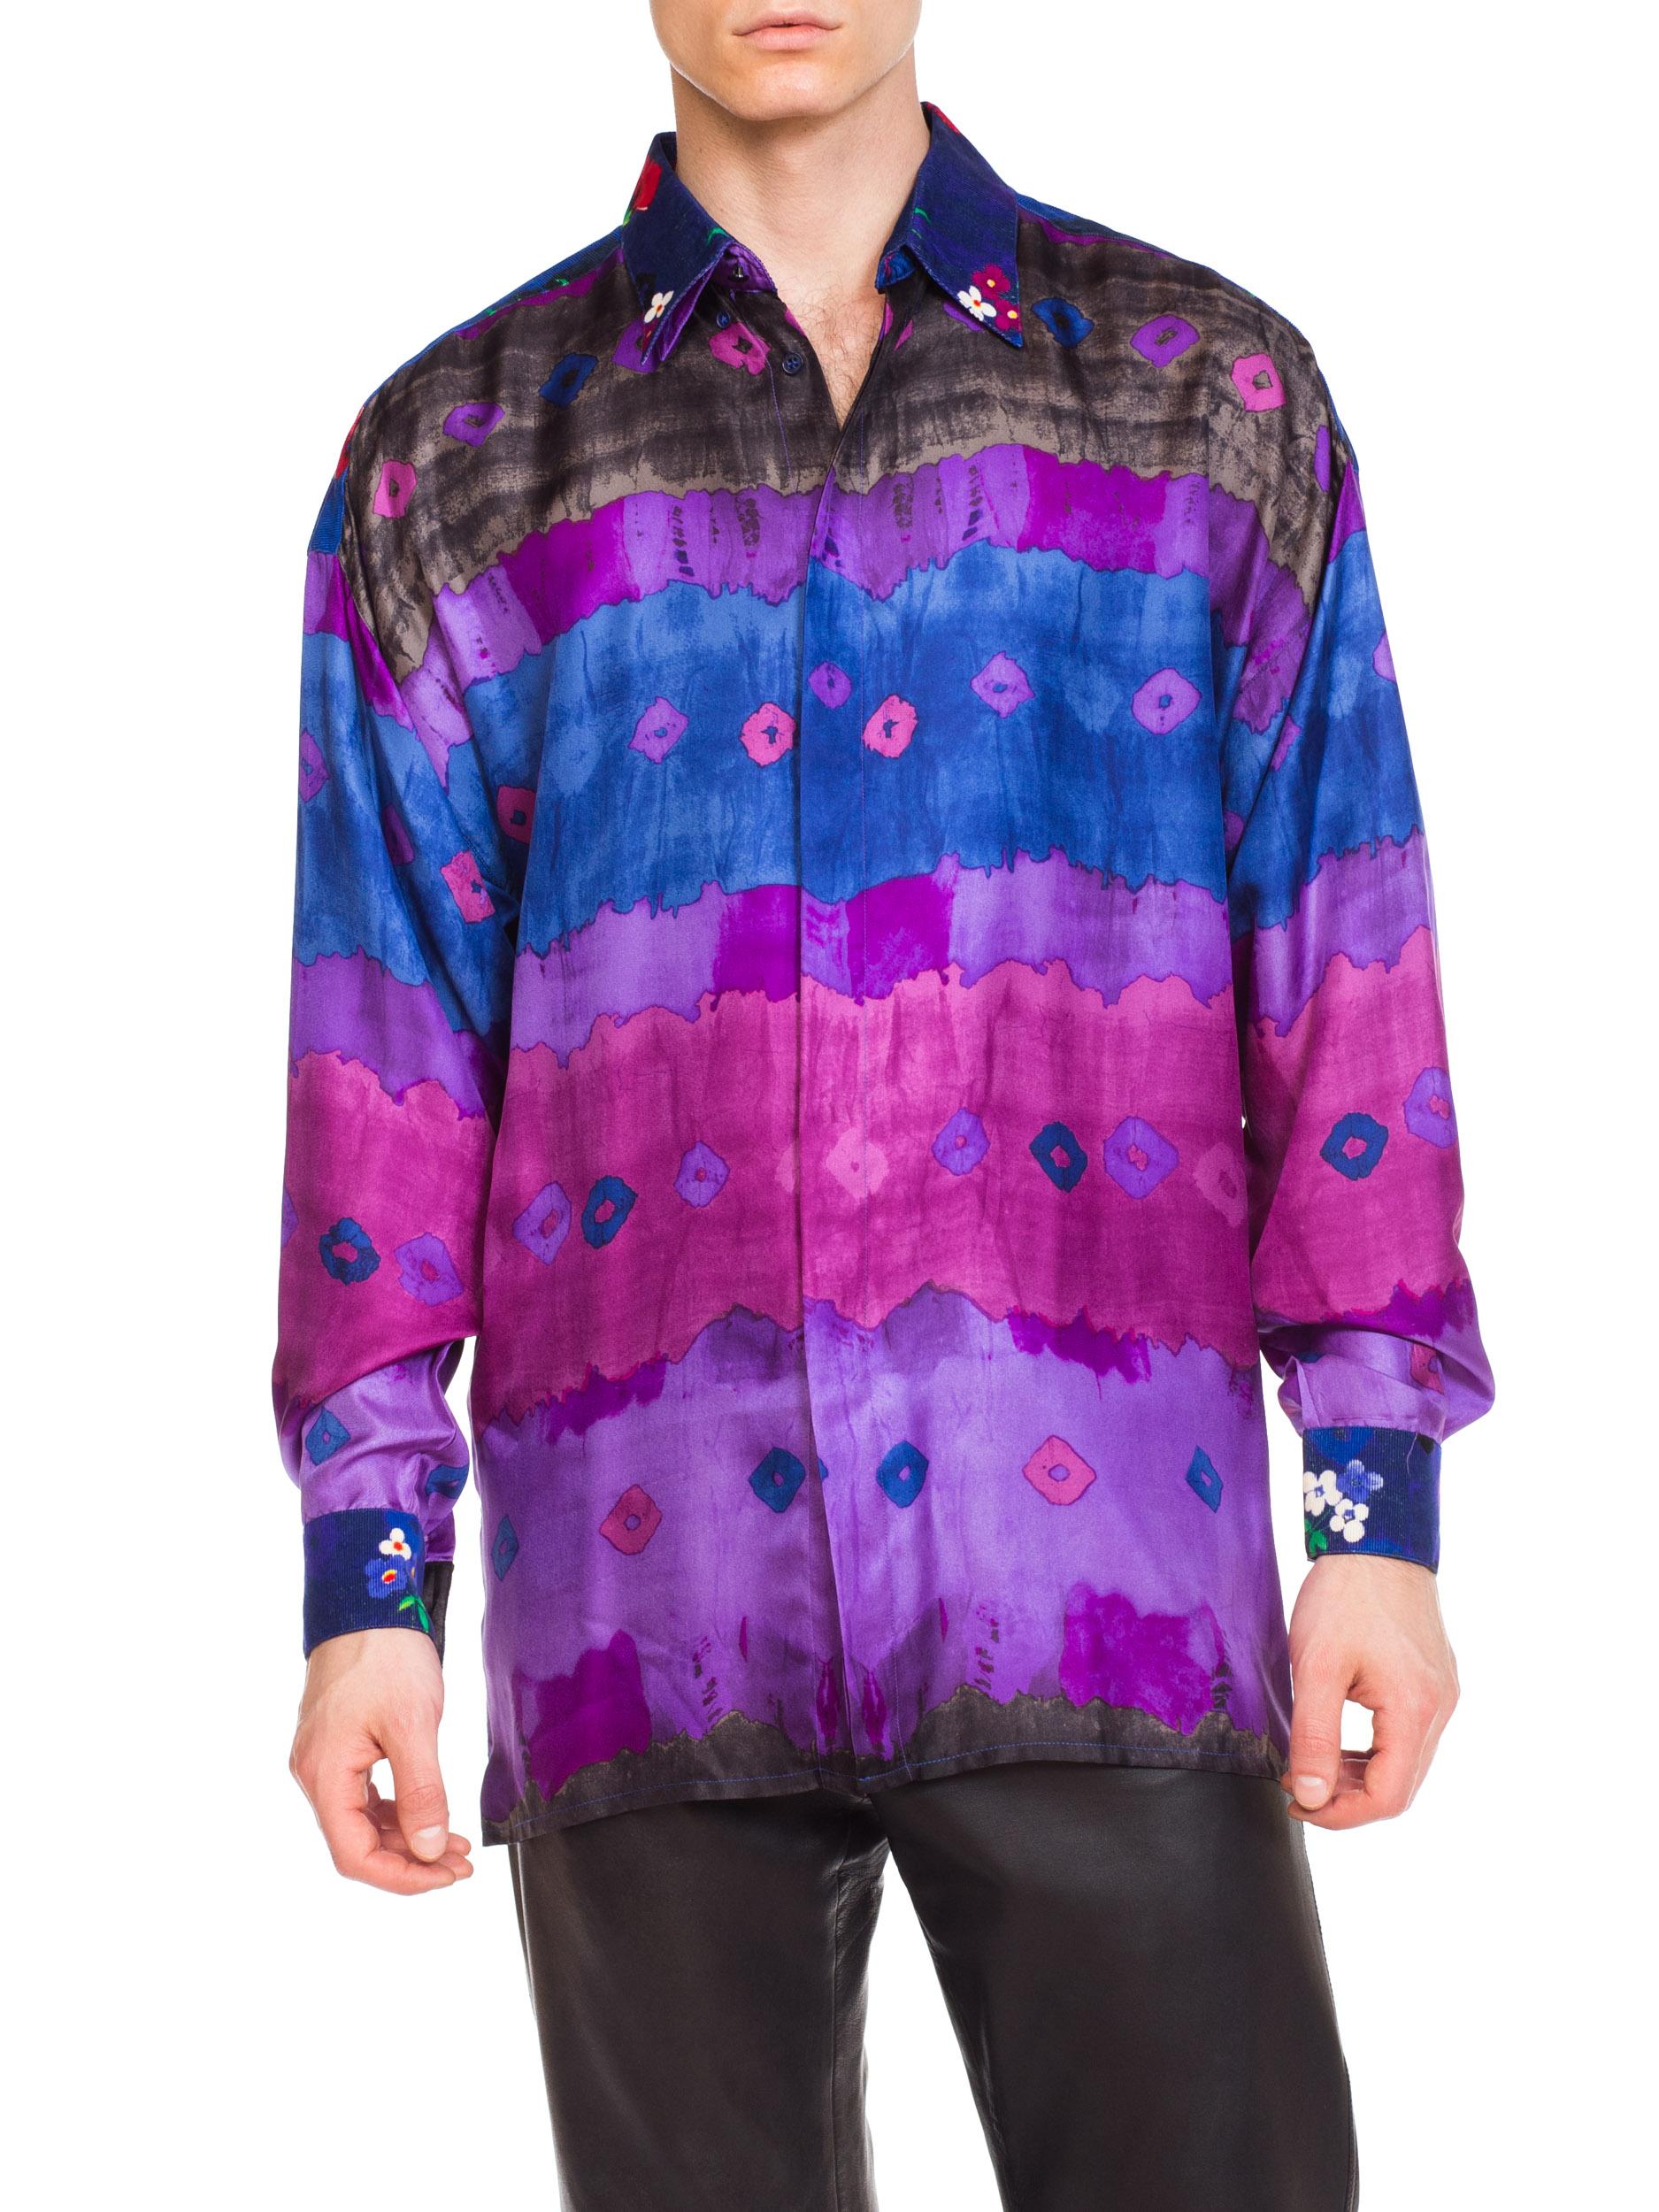 1990S GIANNI VERSACE Purple Tie Dyed Silk & Floral Printed Corduroy Men's  Shir For Sale 11